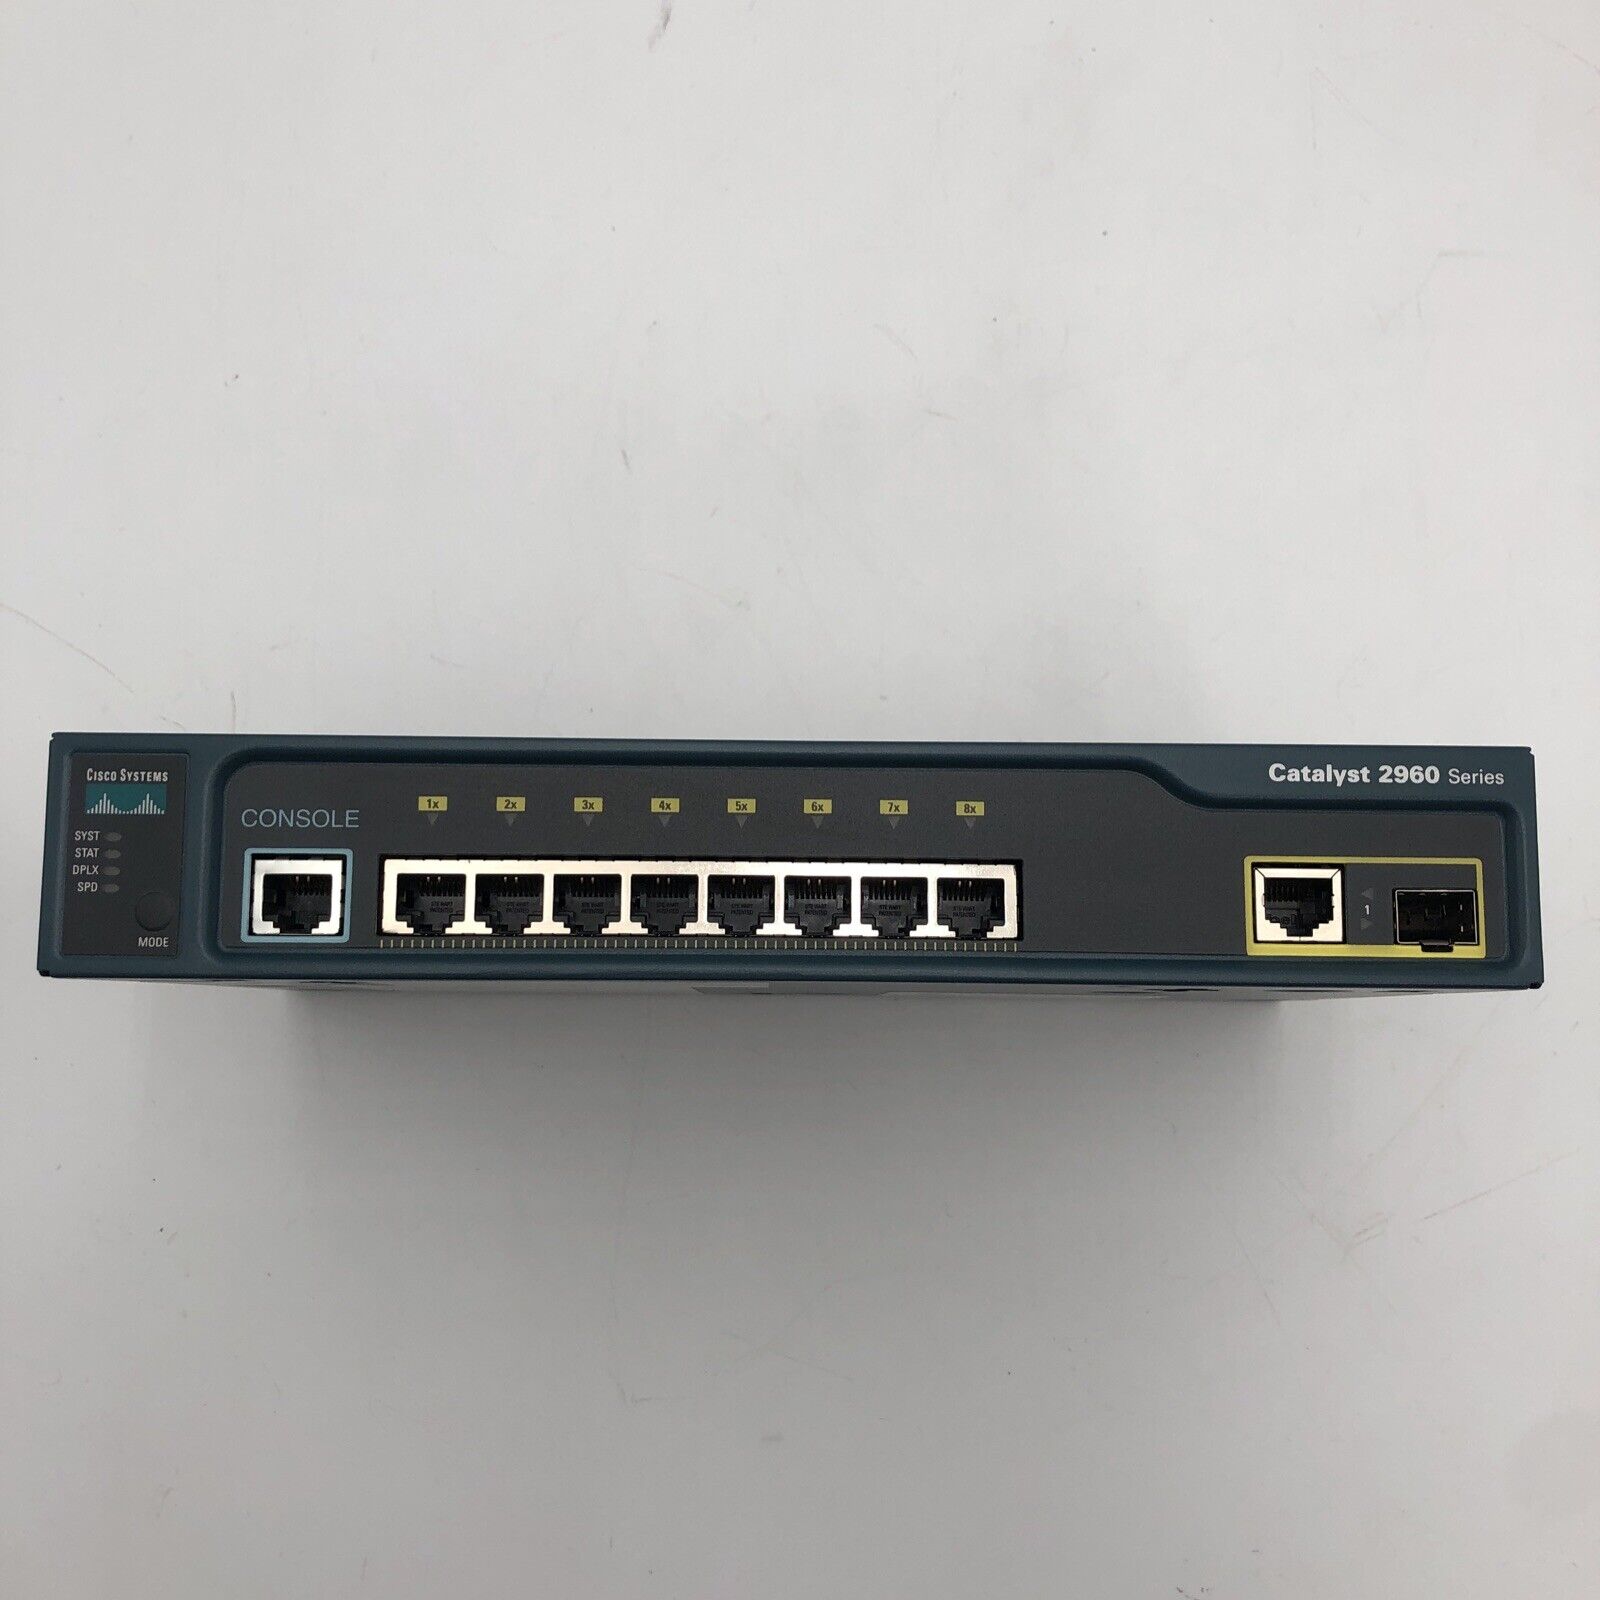 Used Cisco Catalyst 2960 WS-C2960 8-Port Switch POWERS ON READ